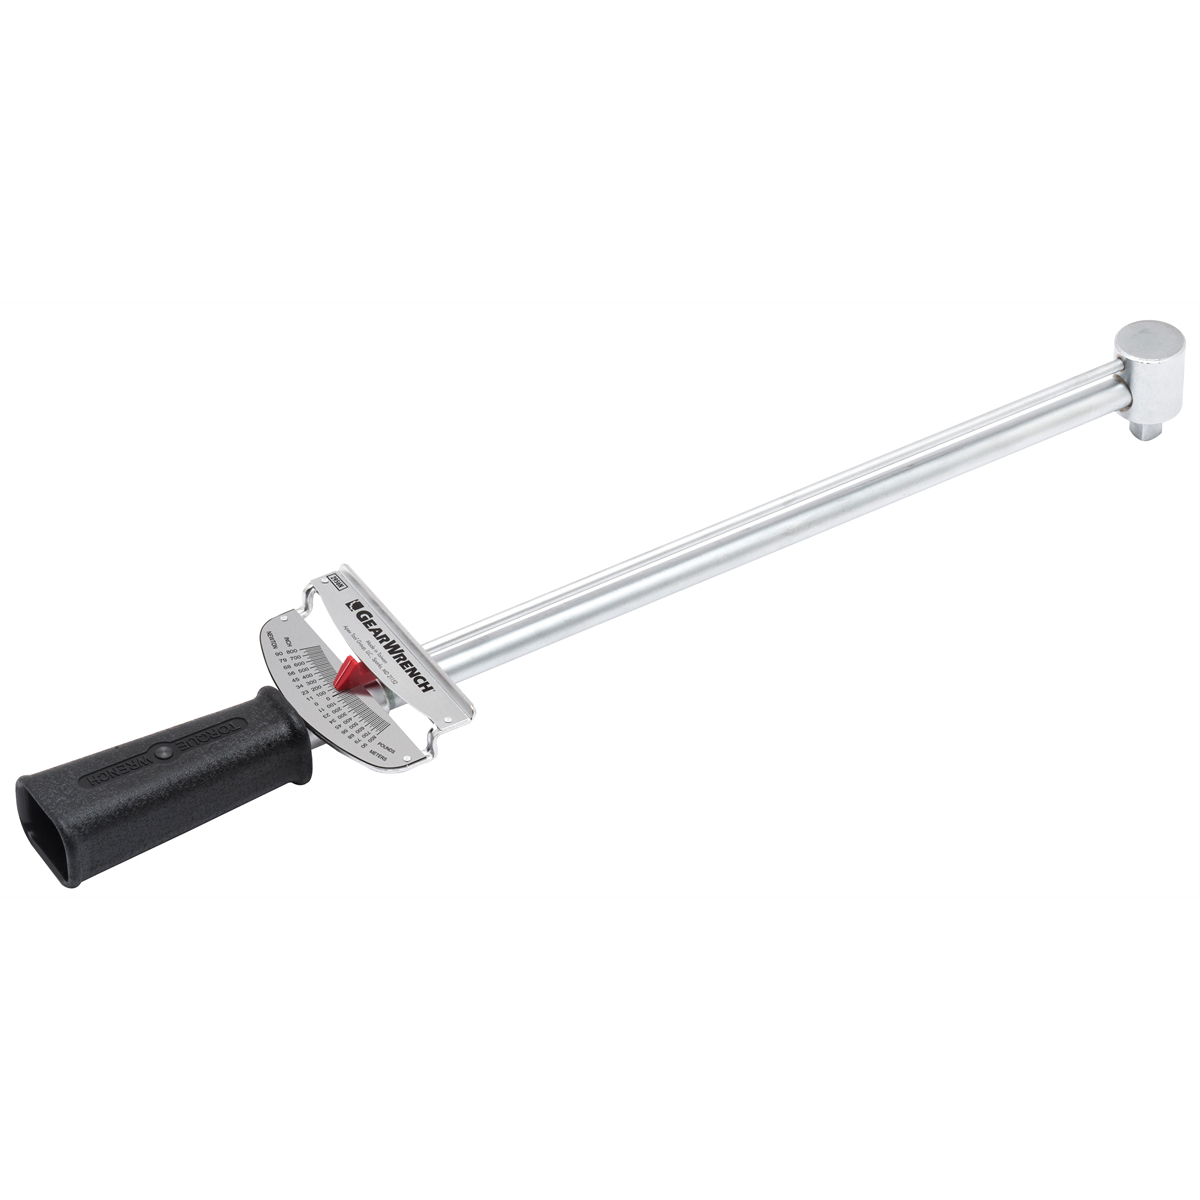 Beam Type Torque Wrench - 3/8In Fixed - 0-600 in-lbs